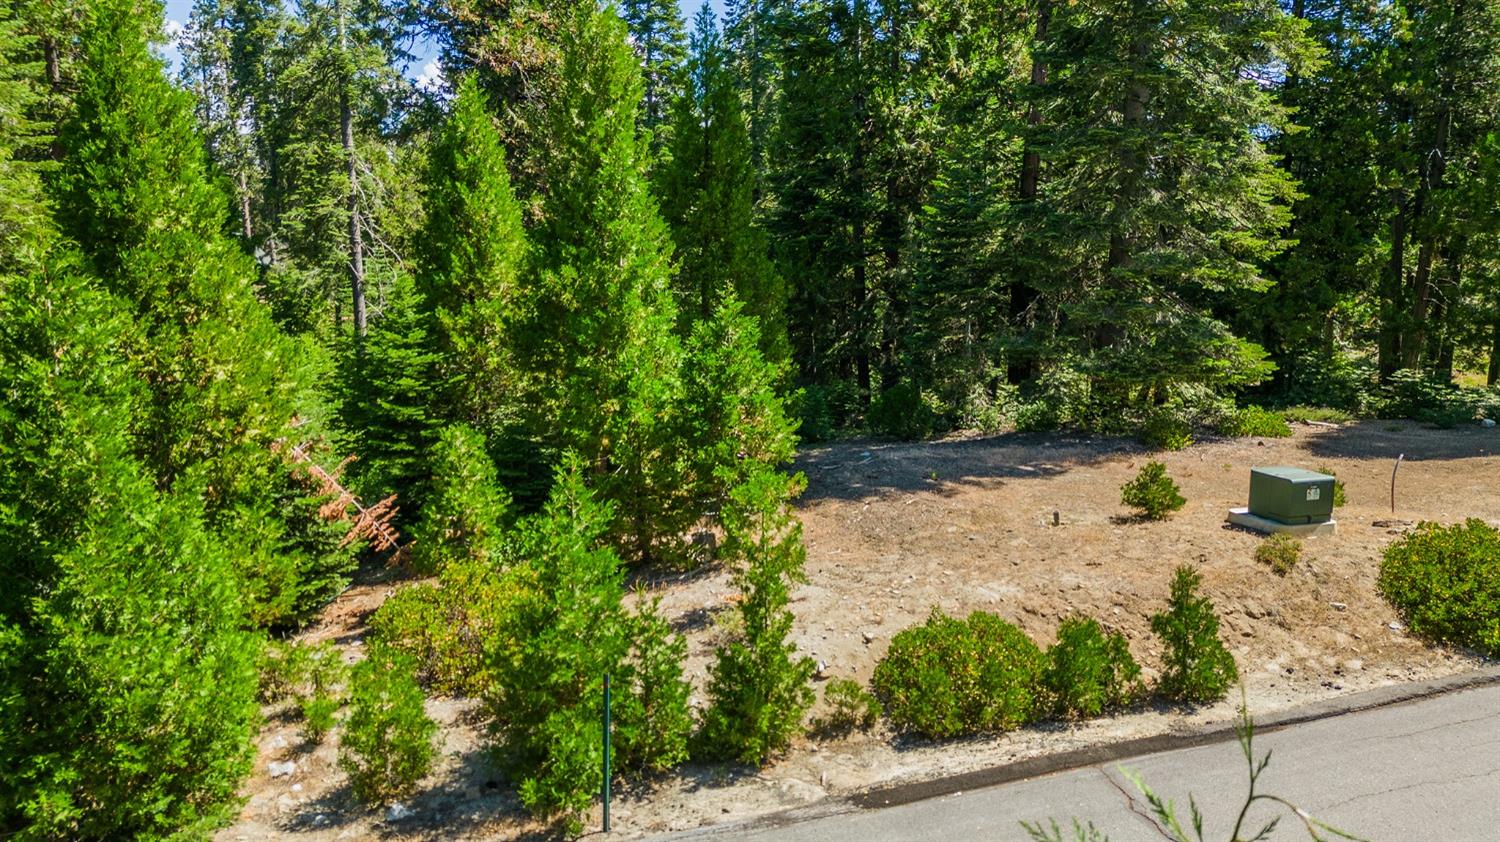 Welcome to Lot 22, Foxglove Ln, within the enchanting Wildflower Phase V development of Shaver Lake. Spanning .459 acres, this forested haven offers a pristine canvas for your mountain retreat. Immerse yourself in nature's embrace, surrounded by lush beauty including vibrant ferns, pines, and majestic oaks. This lot rests on a peaceful street, providing the ideal backdrop for your dream home. Explore the potential to expand with Lot 23 next door, also available for purchase.